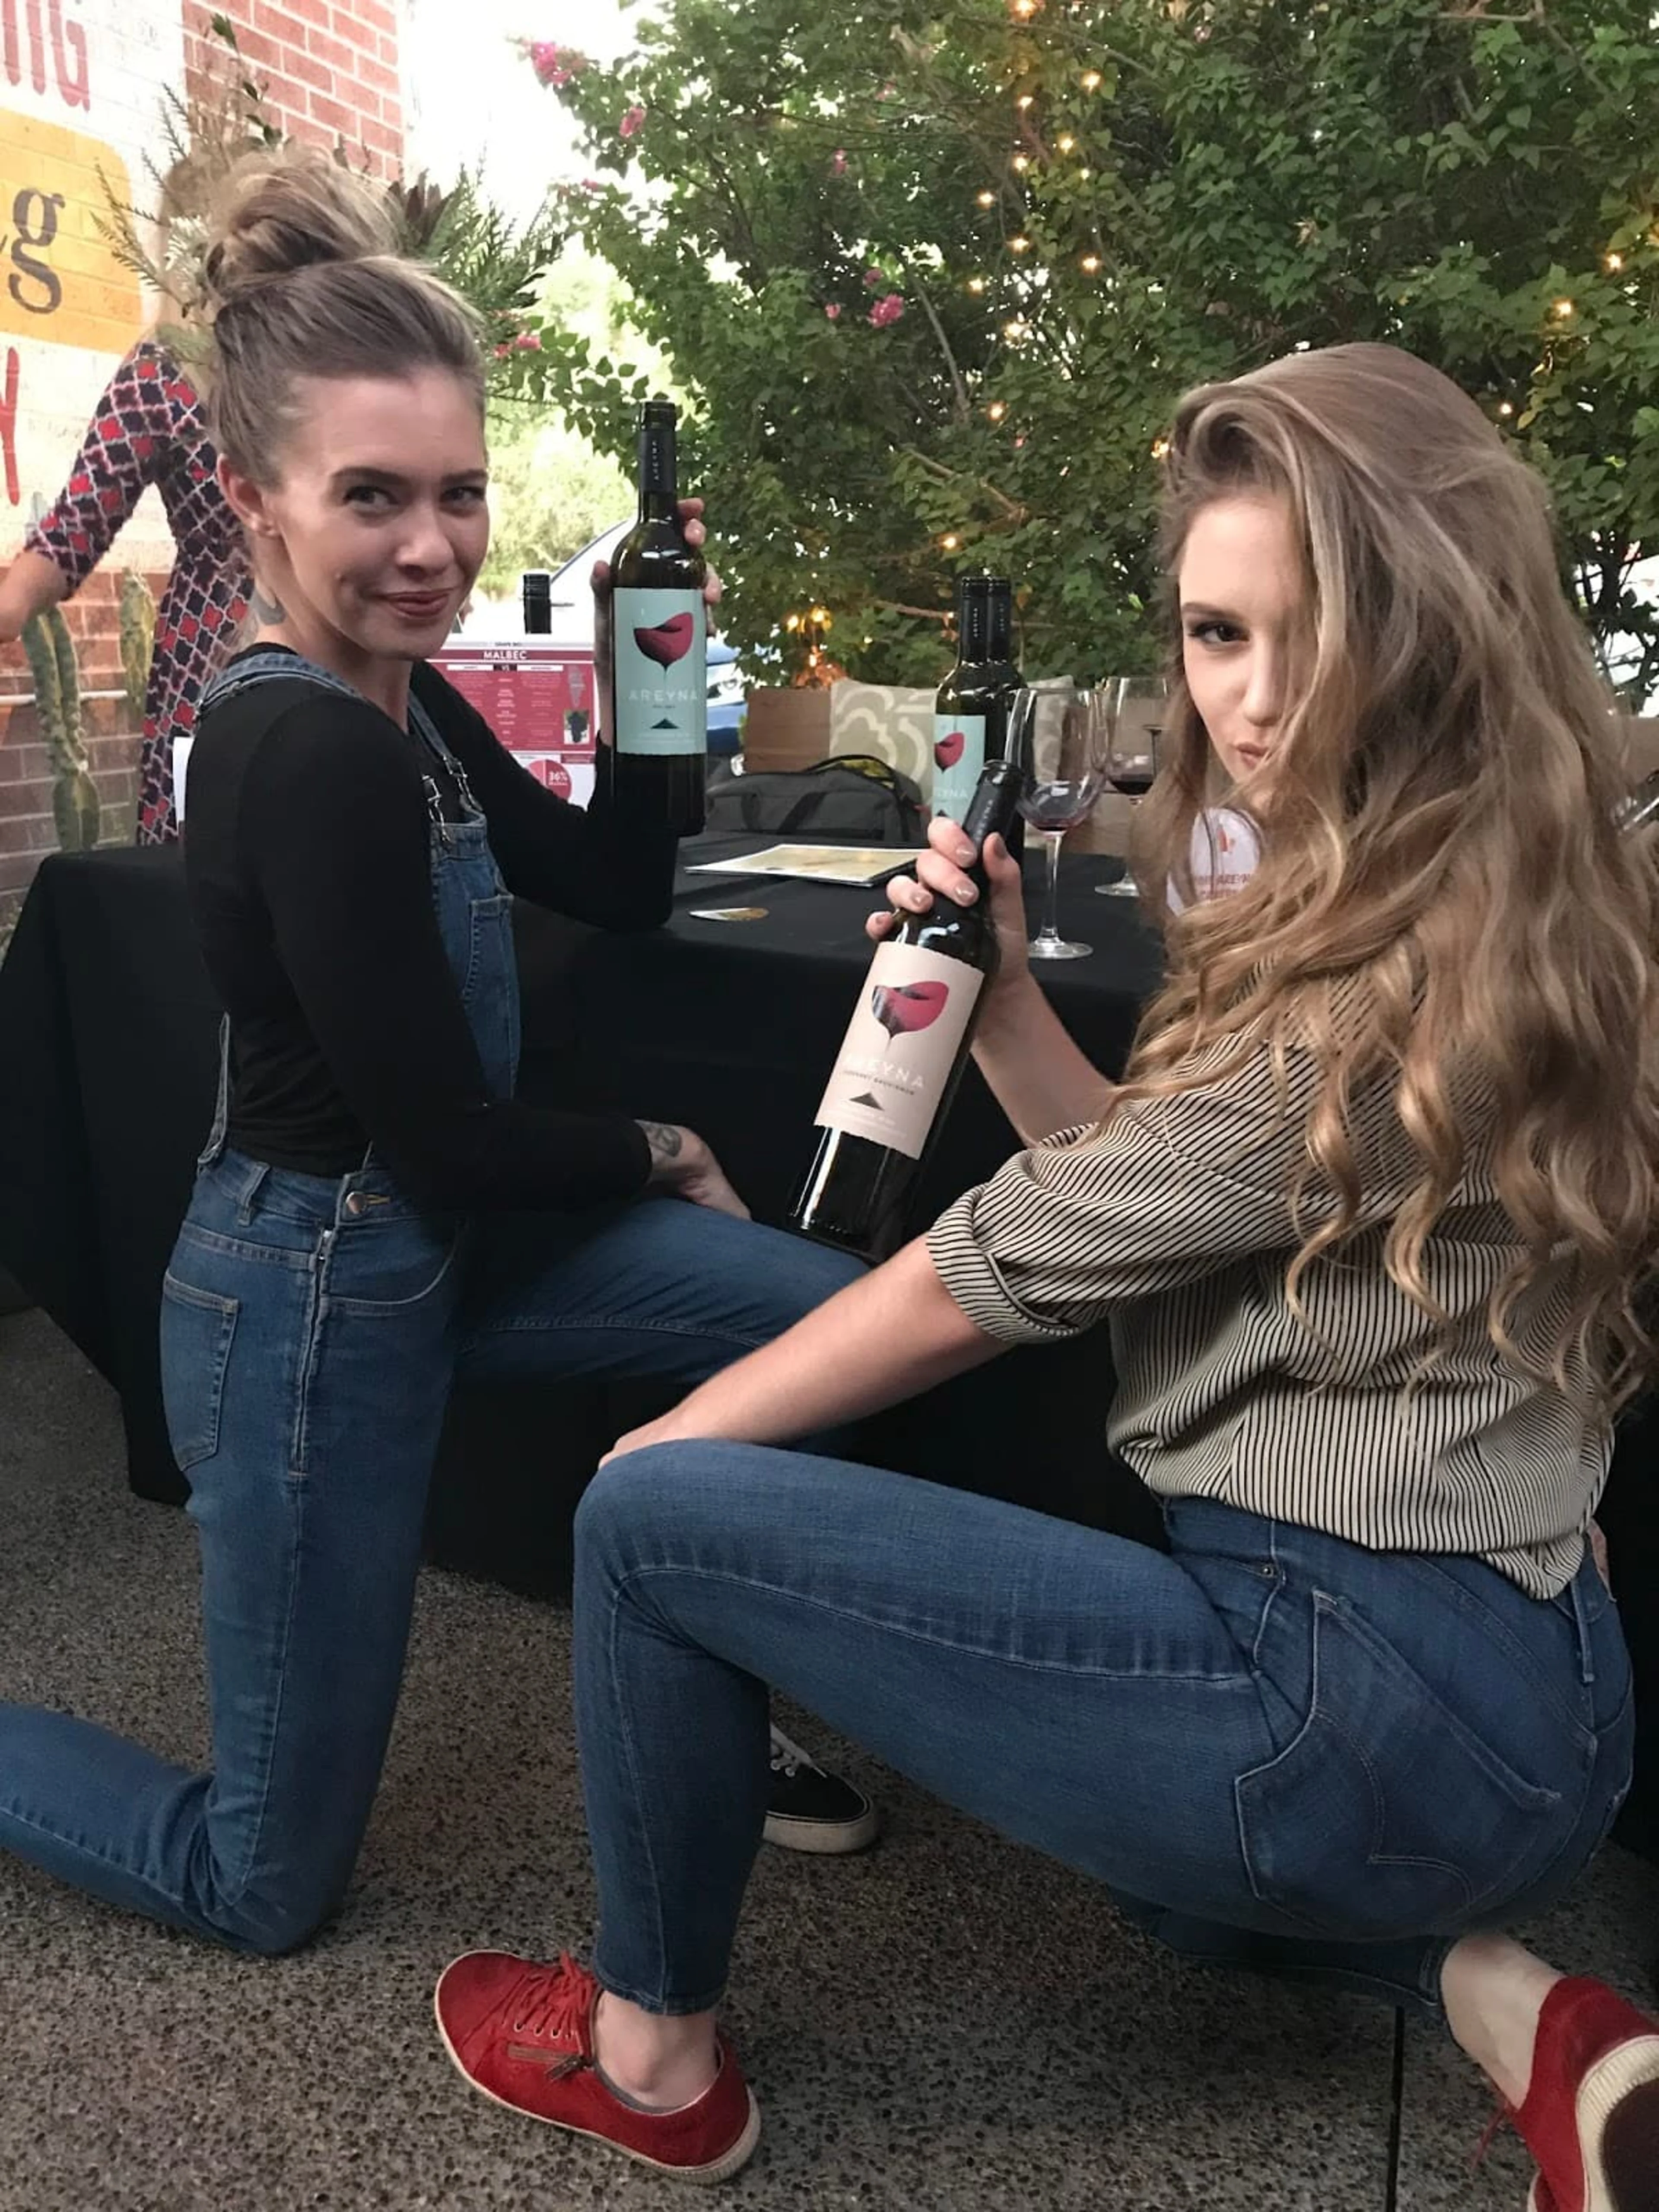 Two women hold up wine bottles and pose.